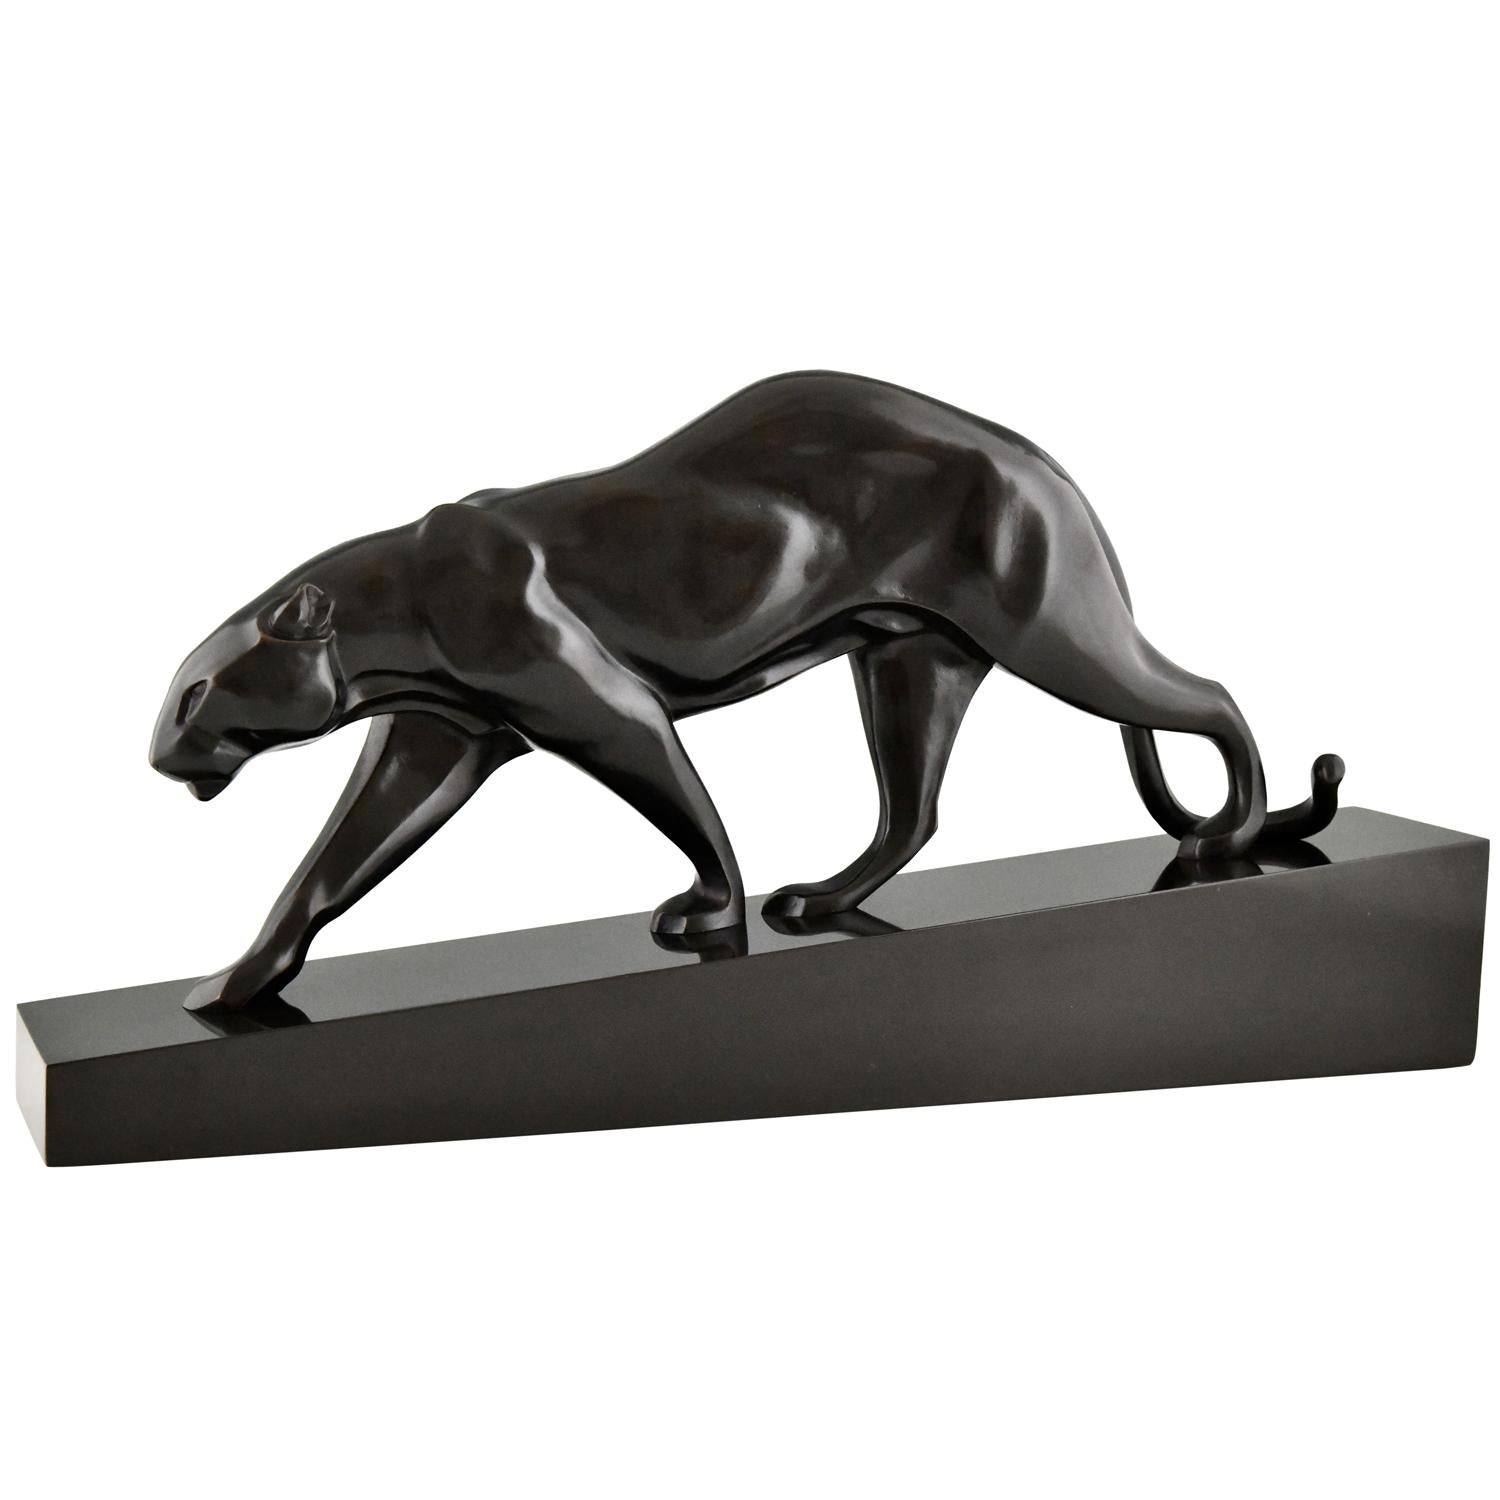 Art Deco bronze sculpture of a panther by Maurice Prost.
Signed M. Prost and Susse frères Editeurs Paris. 
Bronze with black patina on a Belgian Black Marble base. 
This bronze is illustrated in:
Art Bronzes, Michael Forrest and in
Susse